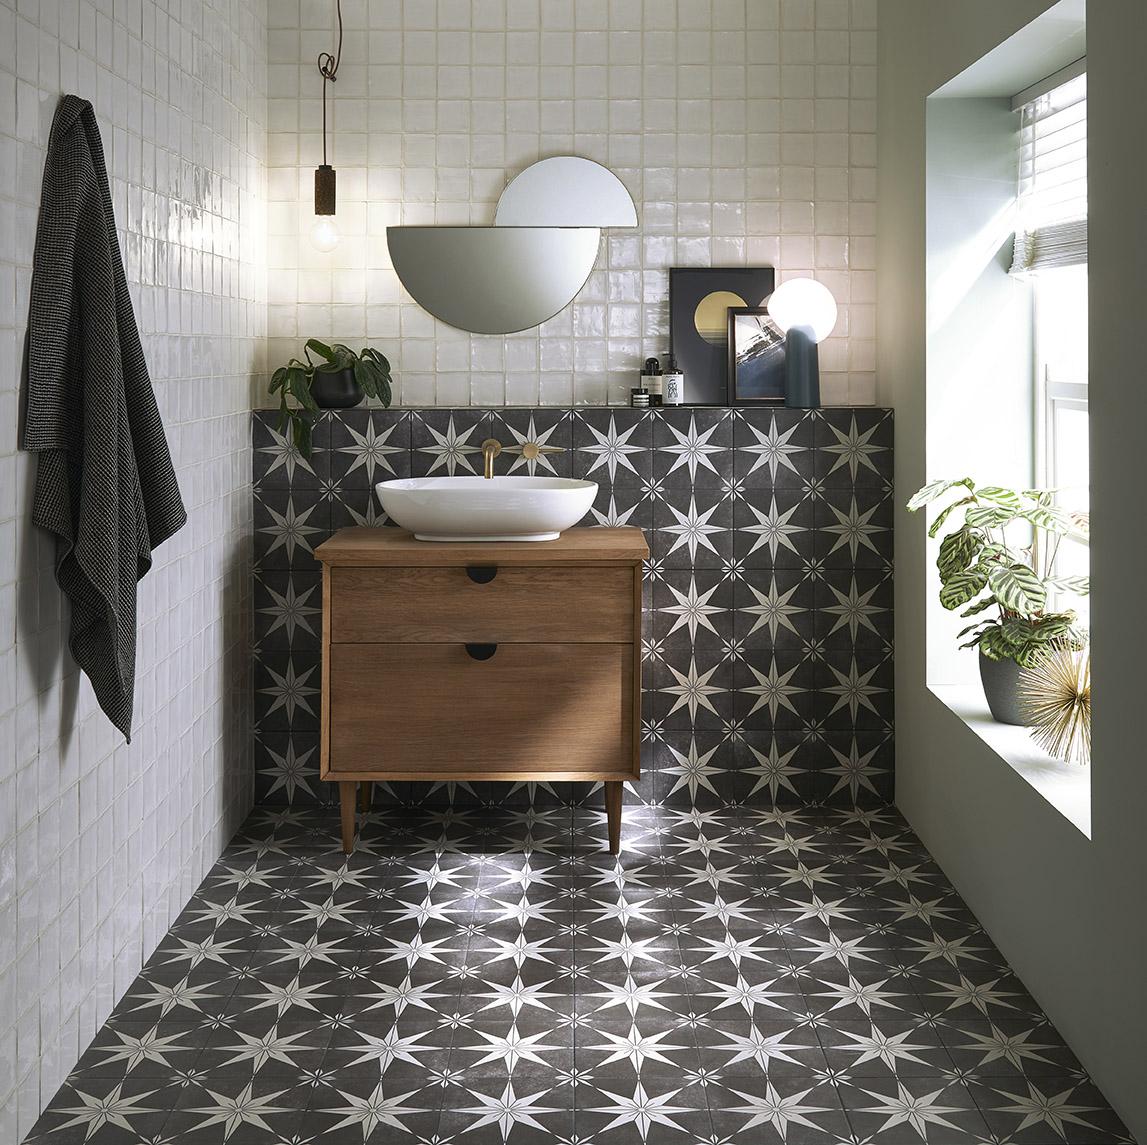 Clean Grout On Floor And Wall Tile, Are Black Bathroom Tiles Hard To Keep Clean